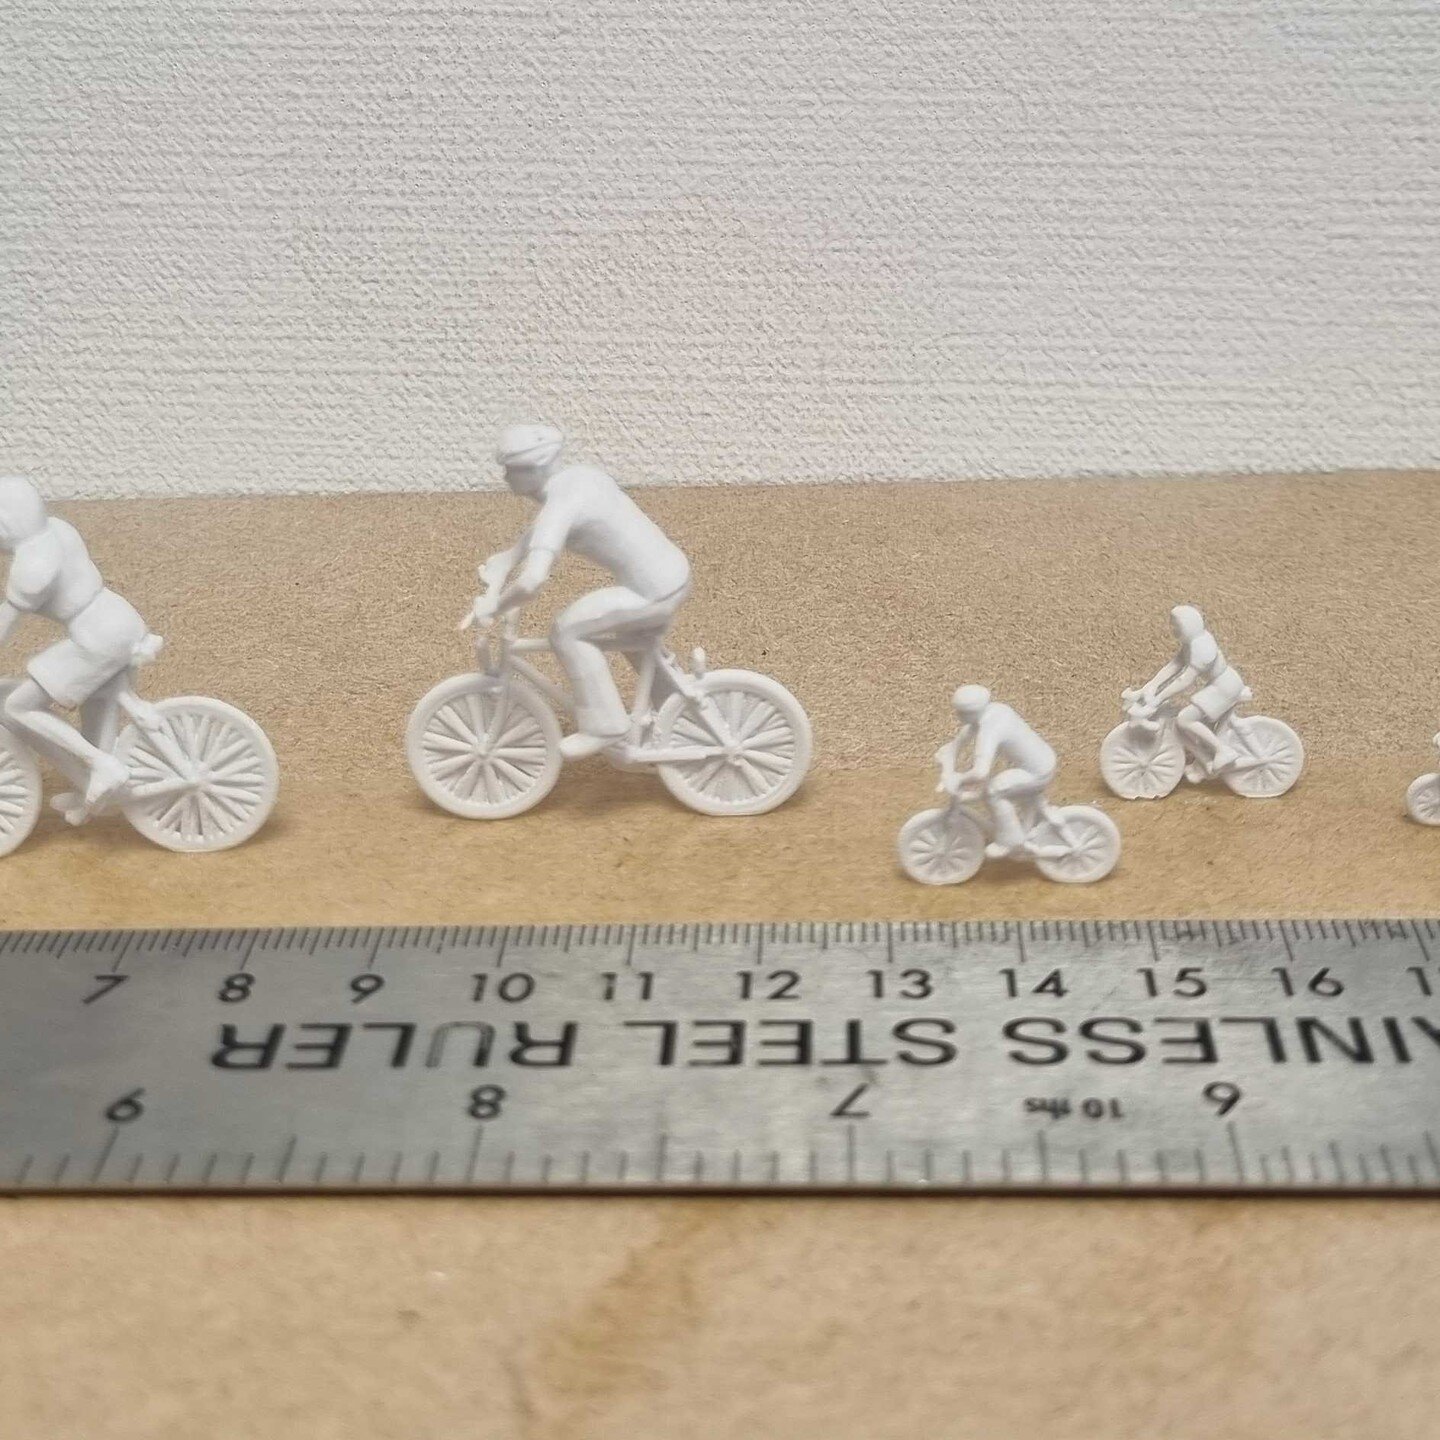 Love the detail on these animations. We at Fixie are constantly working to build a library of up to date and relevant animations for #modelmakers to add to #architectural models. #3dprinters #3dprint #modelmaking